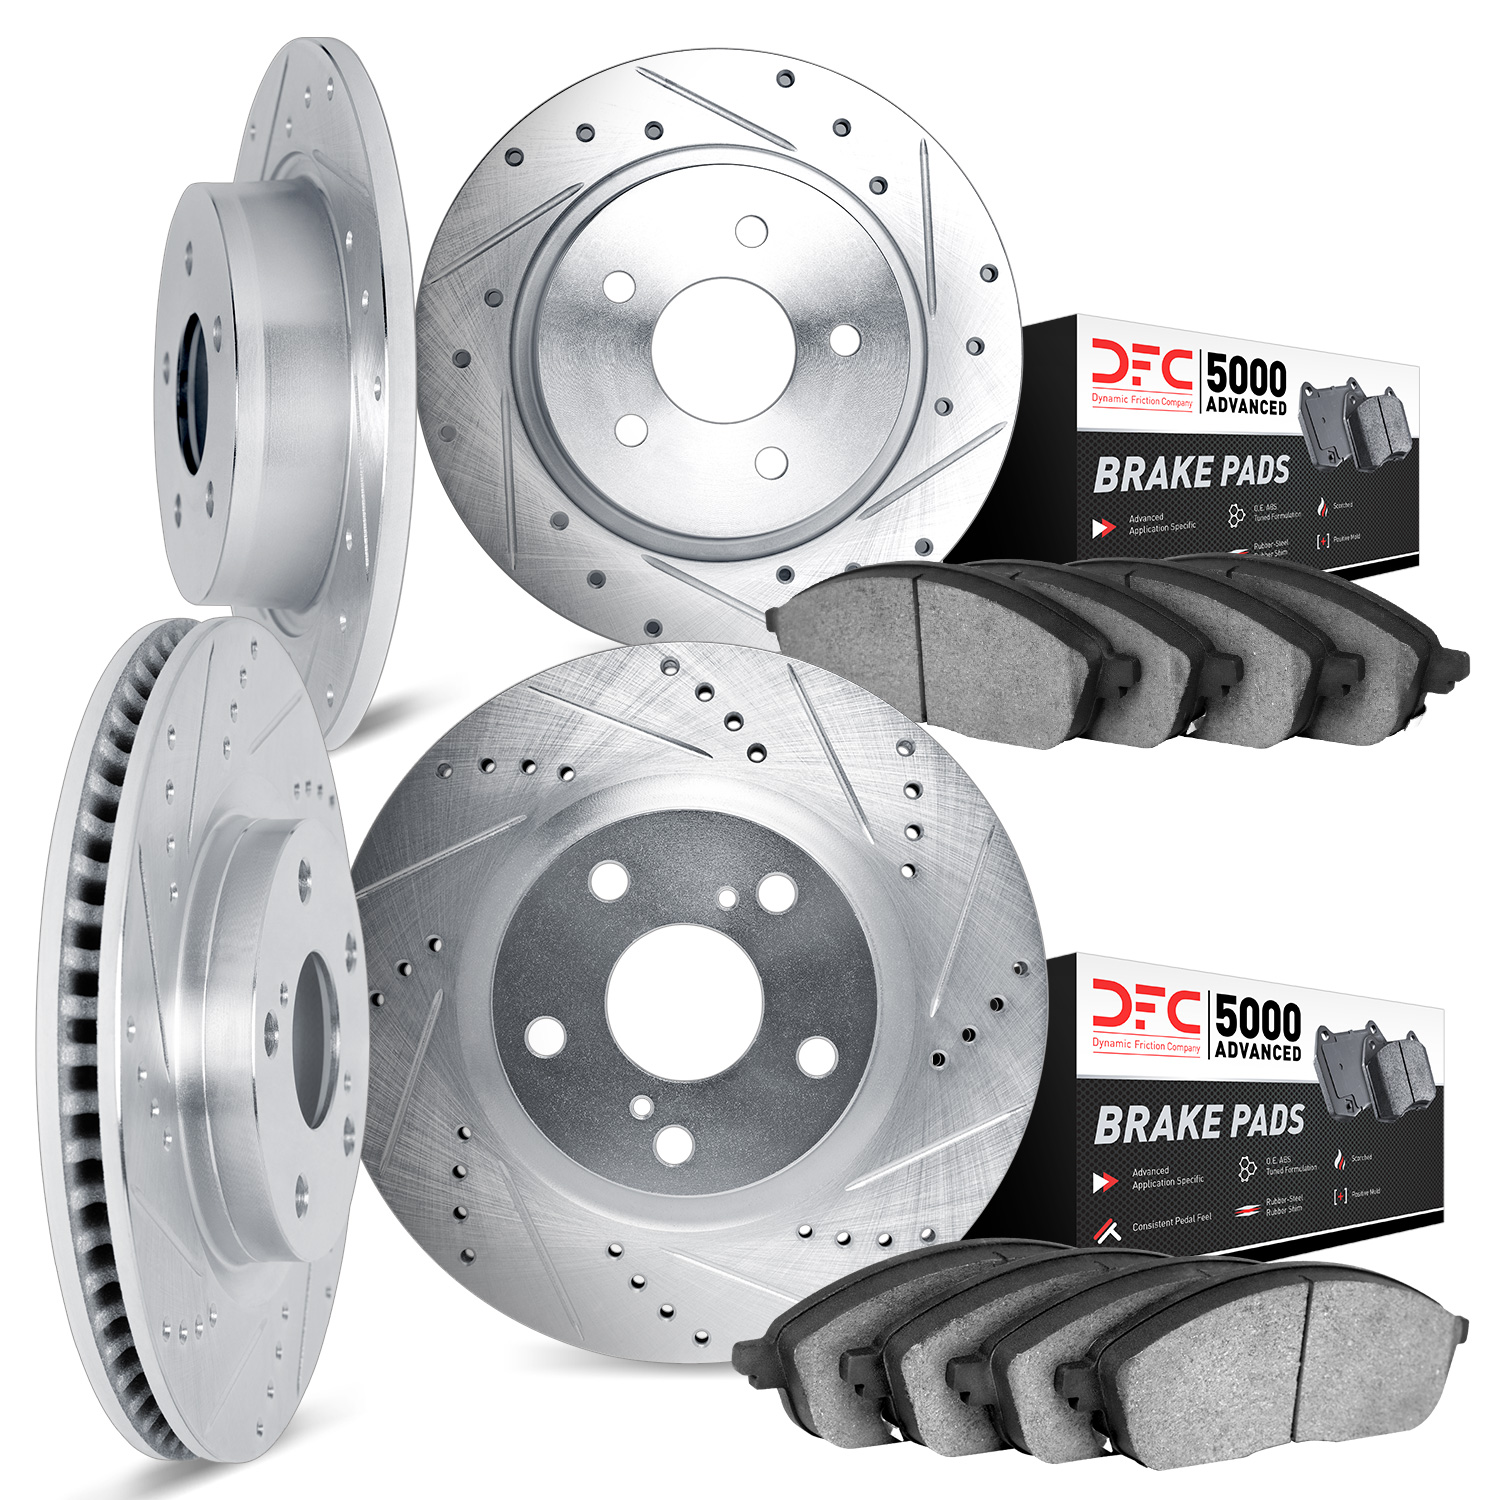 7504-13014 Drilled/Slotted Brake Rotors w/5000 Advanced Brake Pads Kit [Silver], Fits Select Subaru, Position: Front and Rear